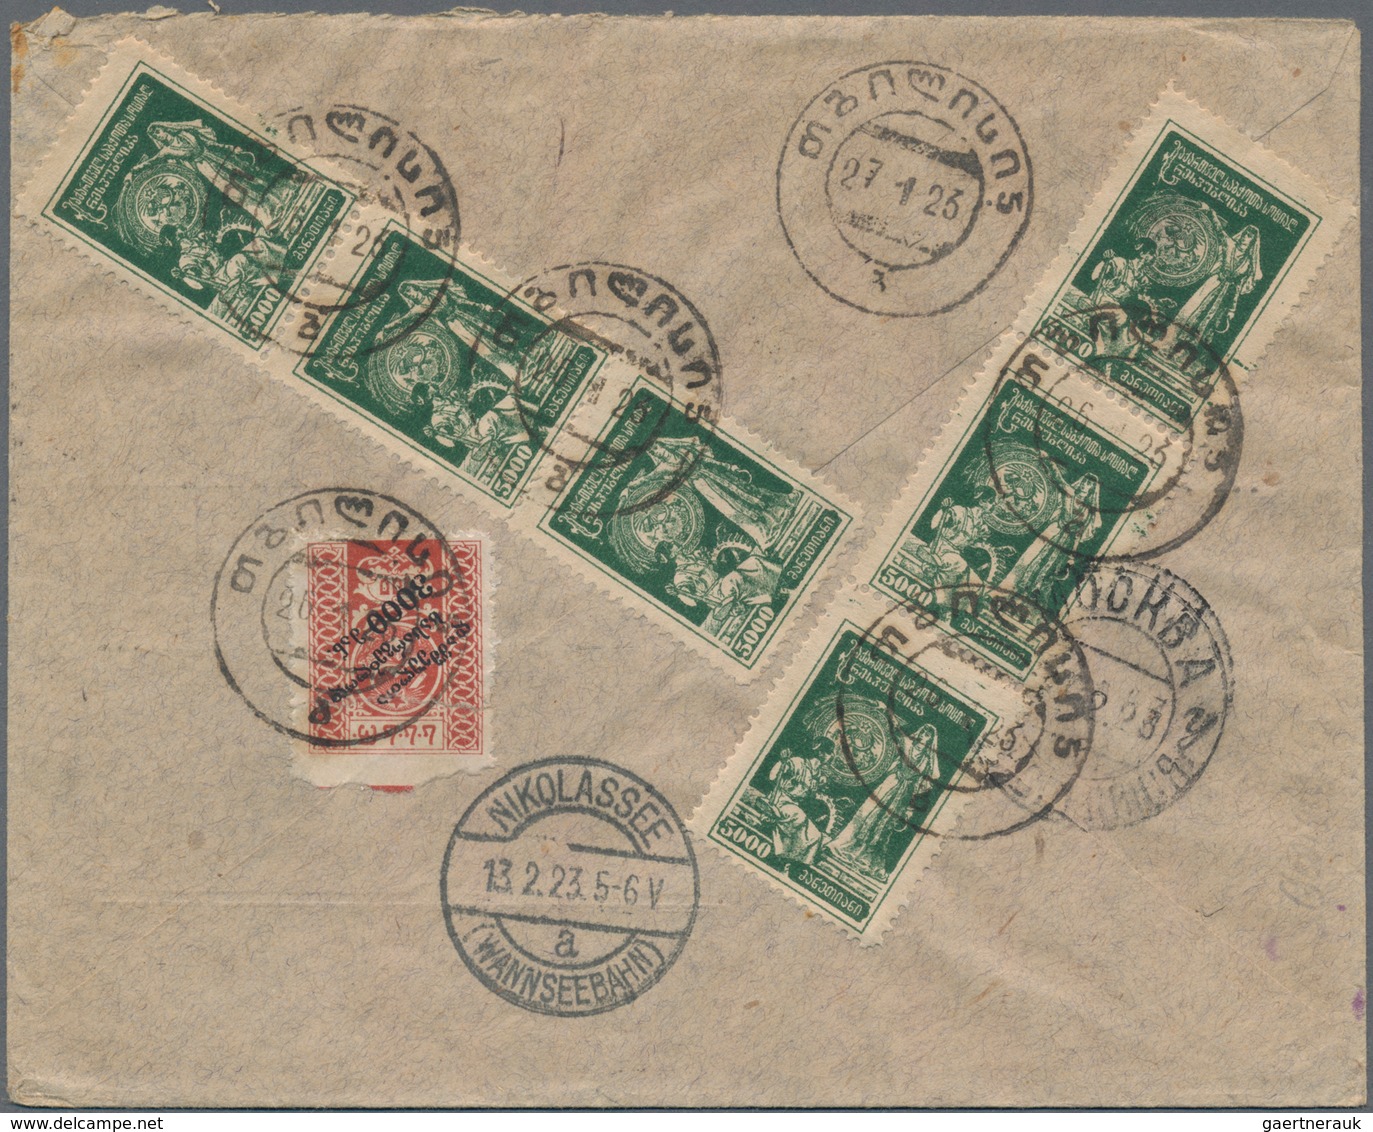 Georgien: 1922/23, Two Registered Covers And One Frontside All Franked With Revaluated Stamps From A - Georgien